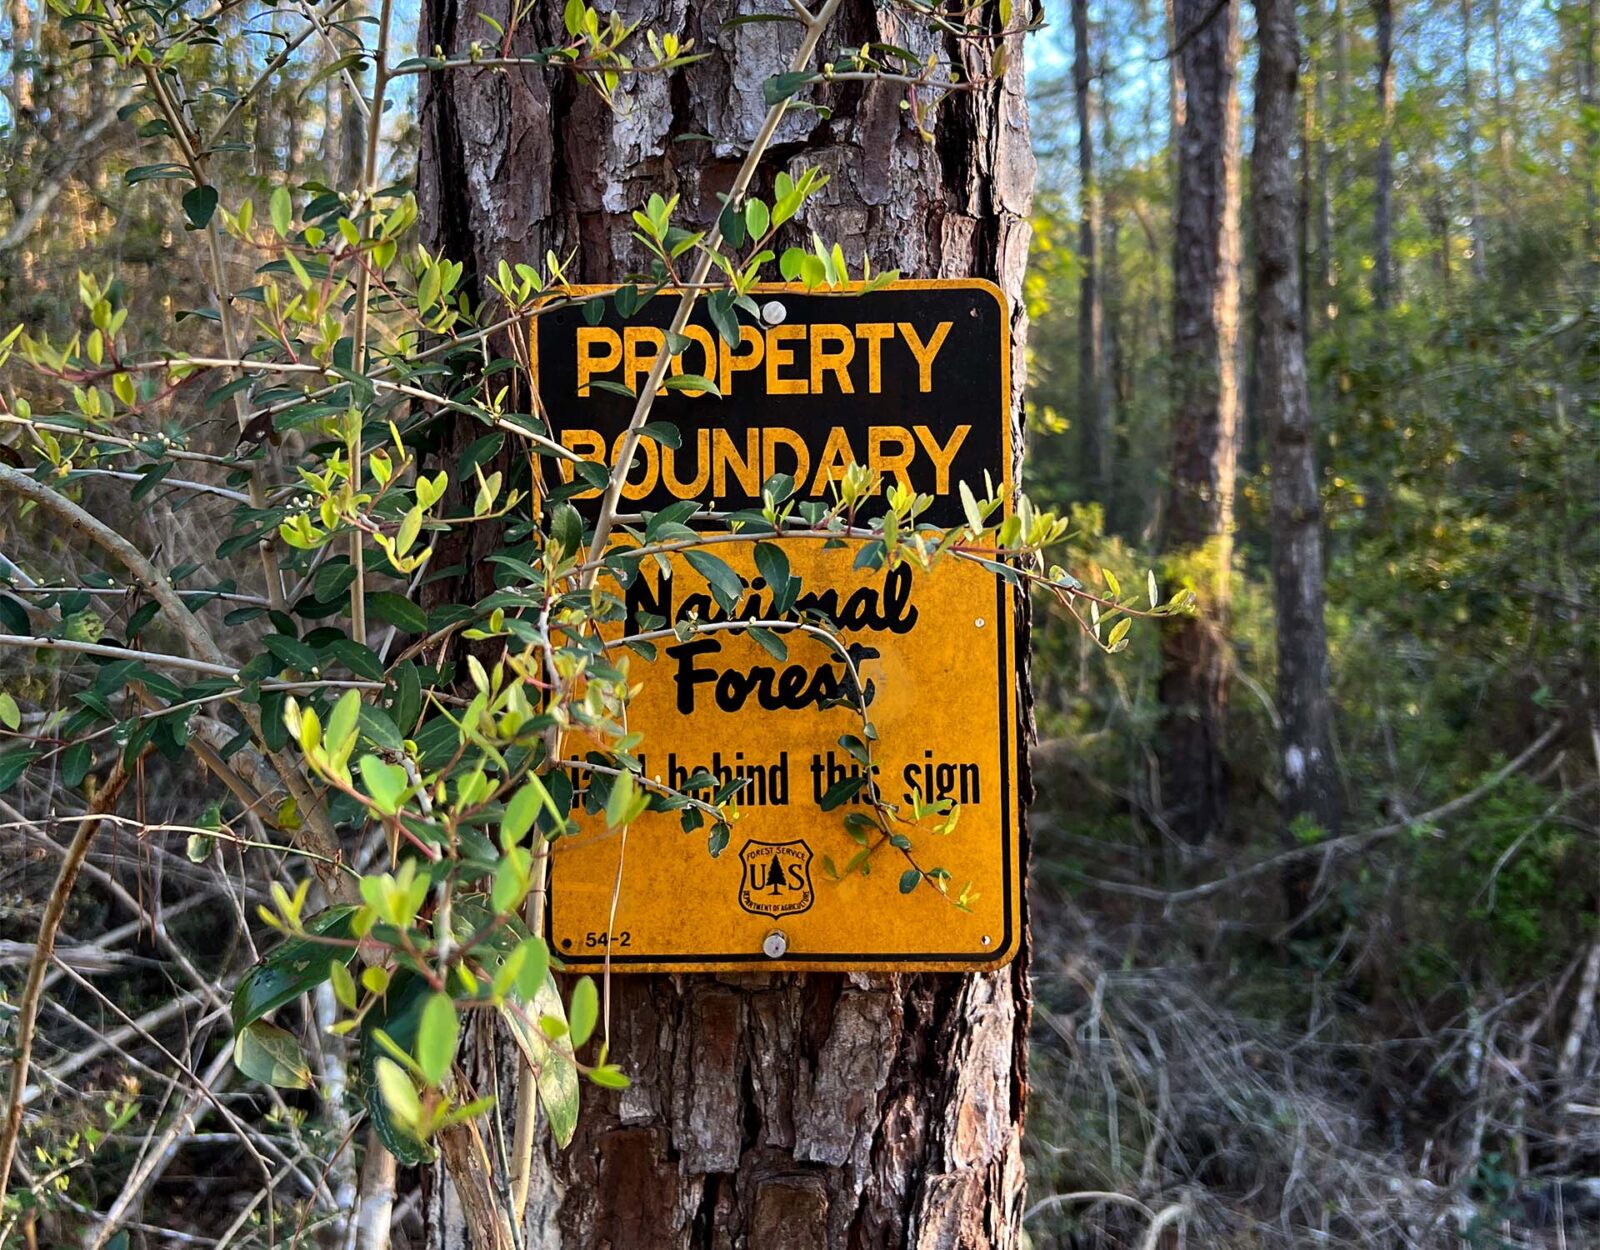 Property boundary sign for the national forest on a tree 